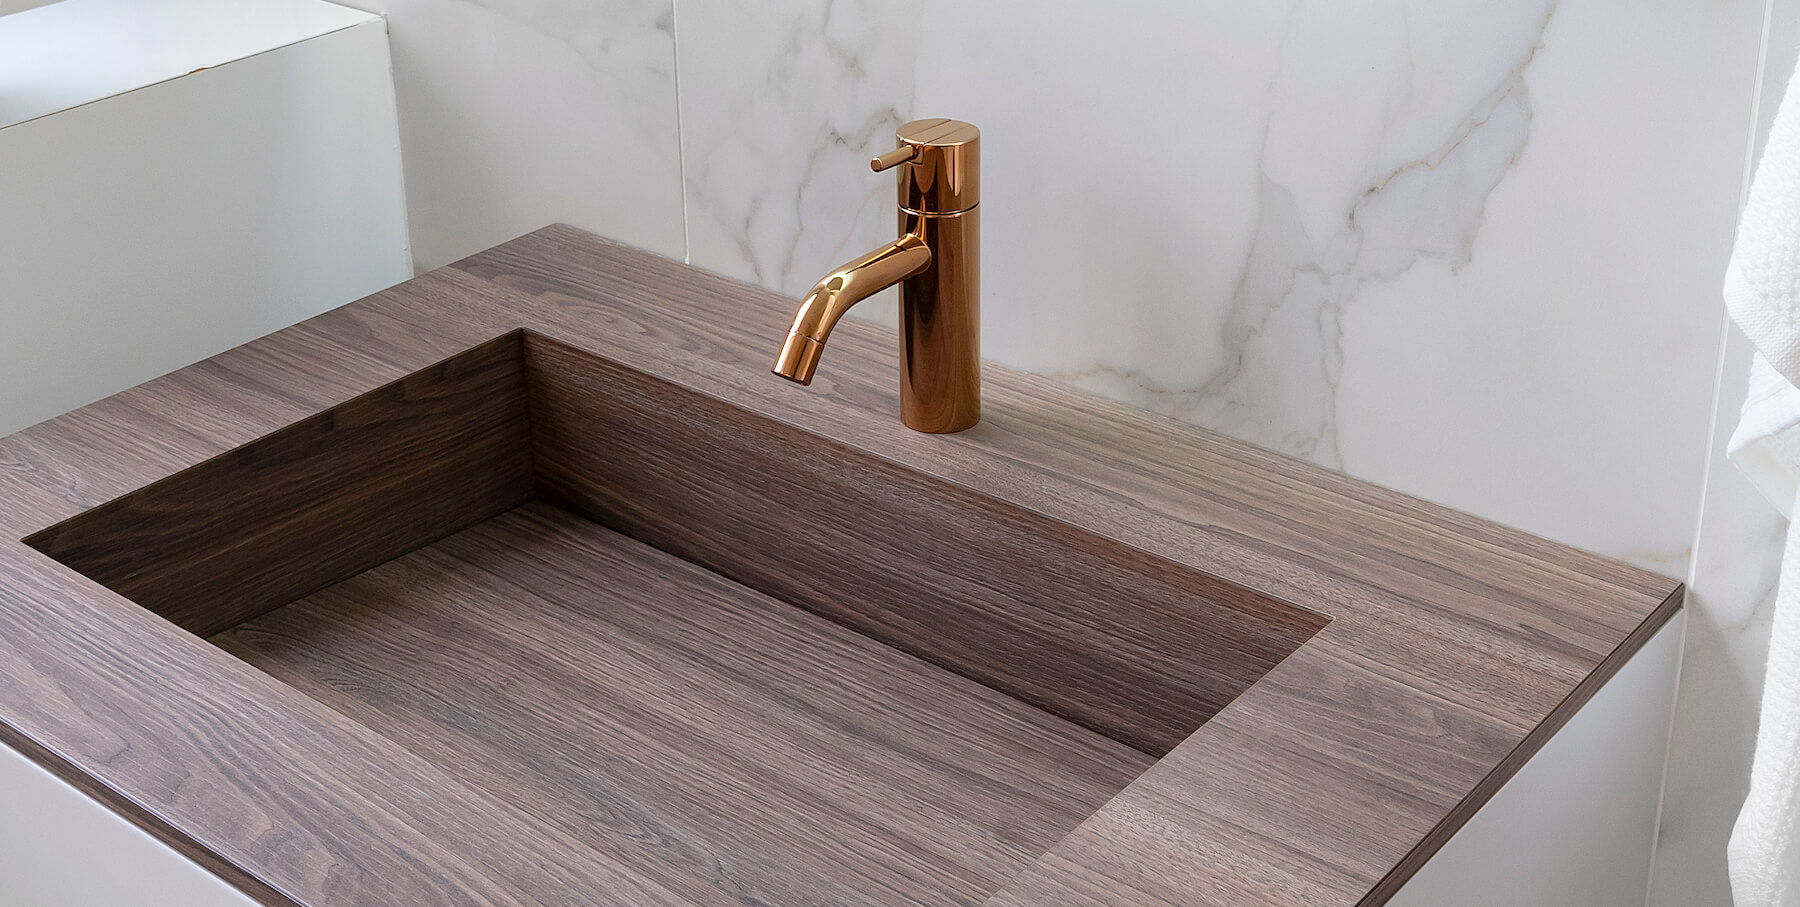 Bronze deck-mounted VOLA faucet above a basin